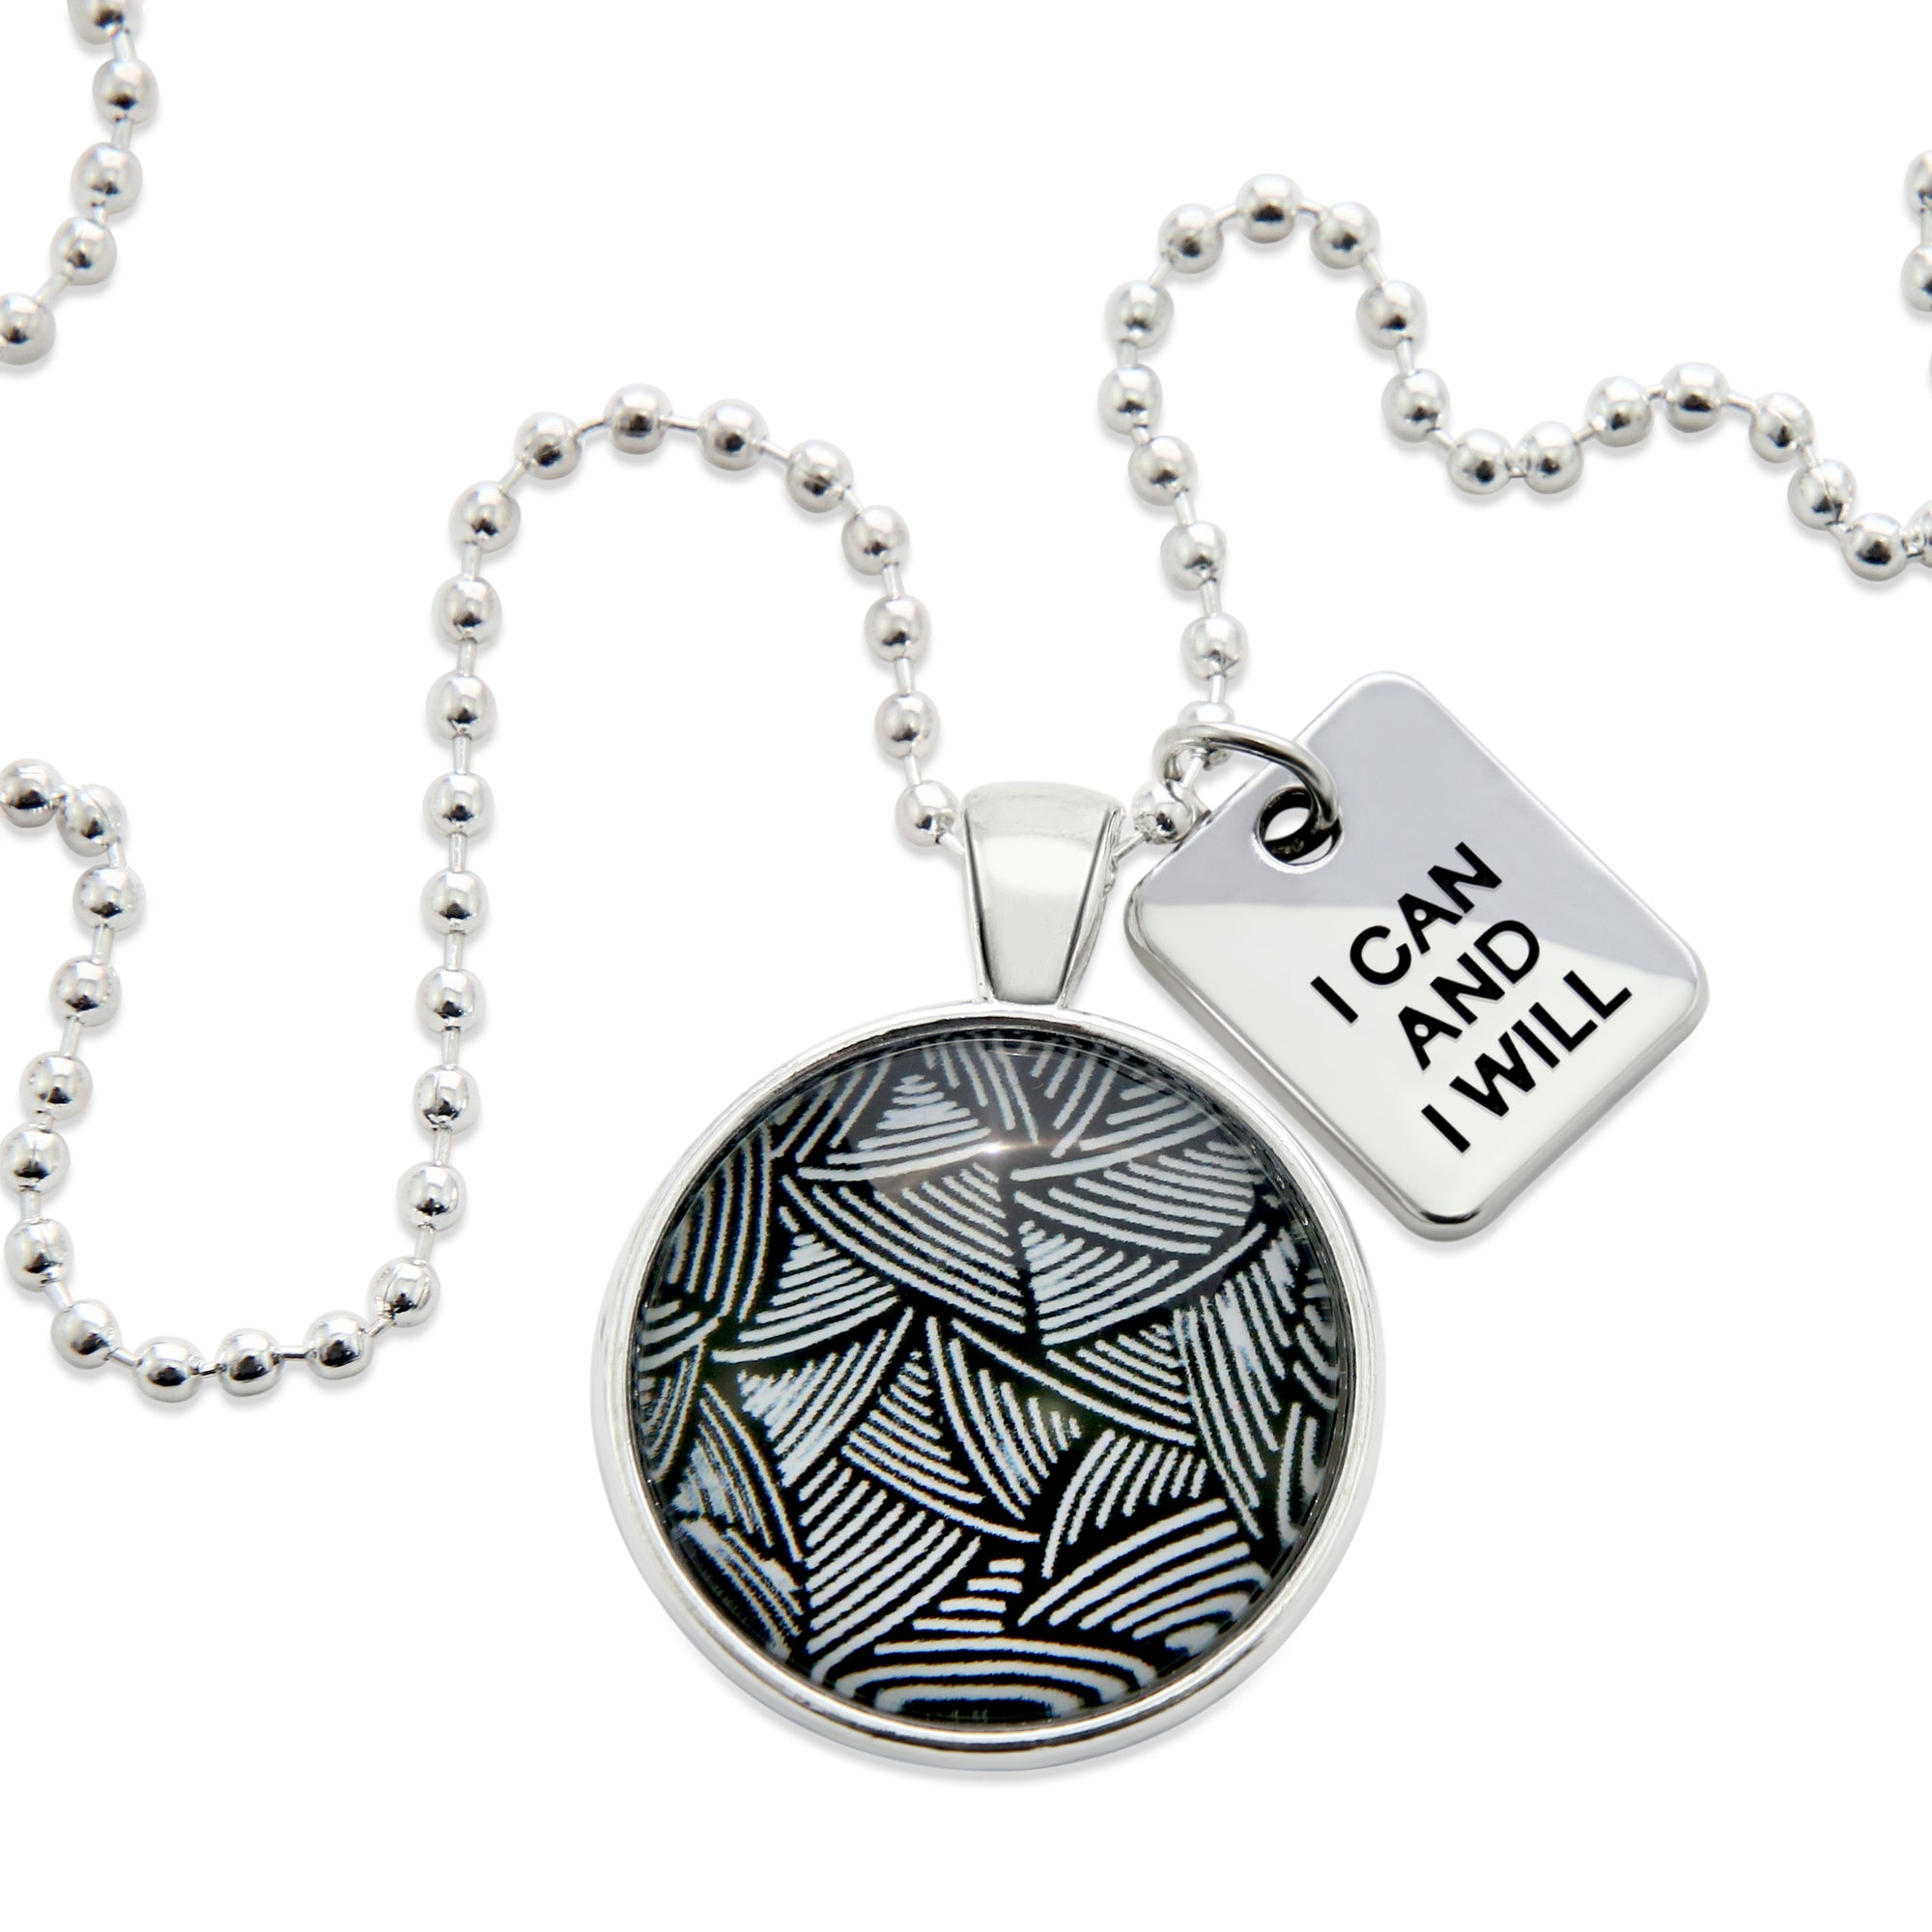 Black & White Collection - Bright Silver 'I CAN AND I WILL' Necklace - Scratch (11224)